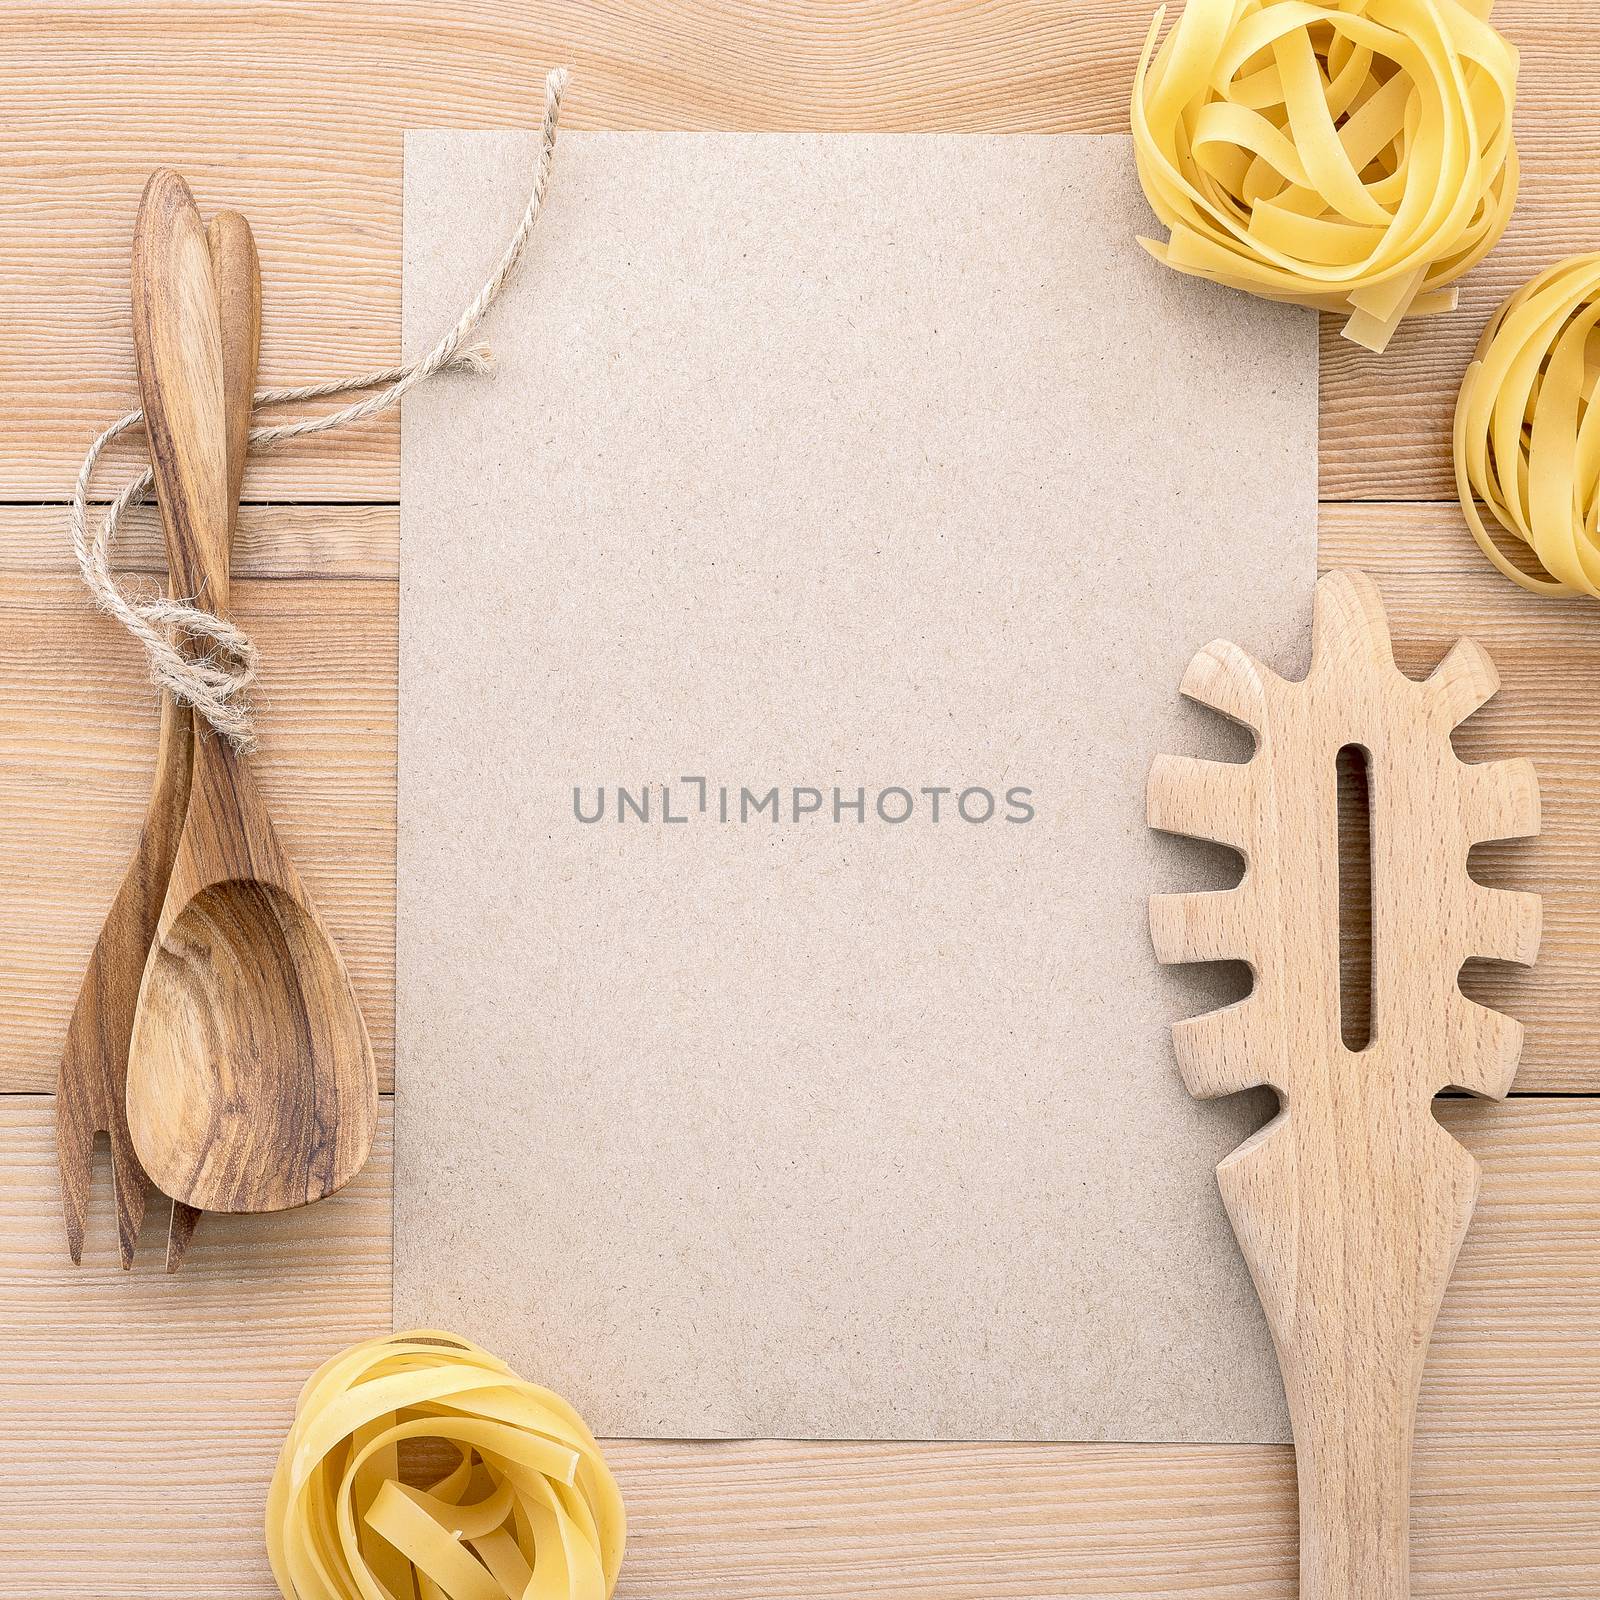 Italian foods concept and menu design . Blank paper and  pasta ladle on wooden background.